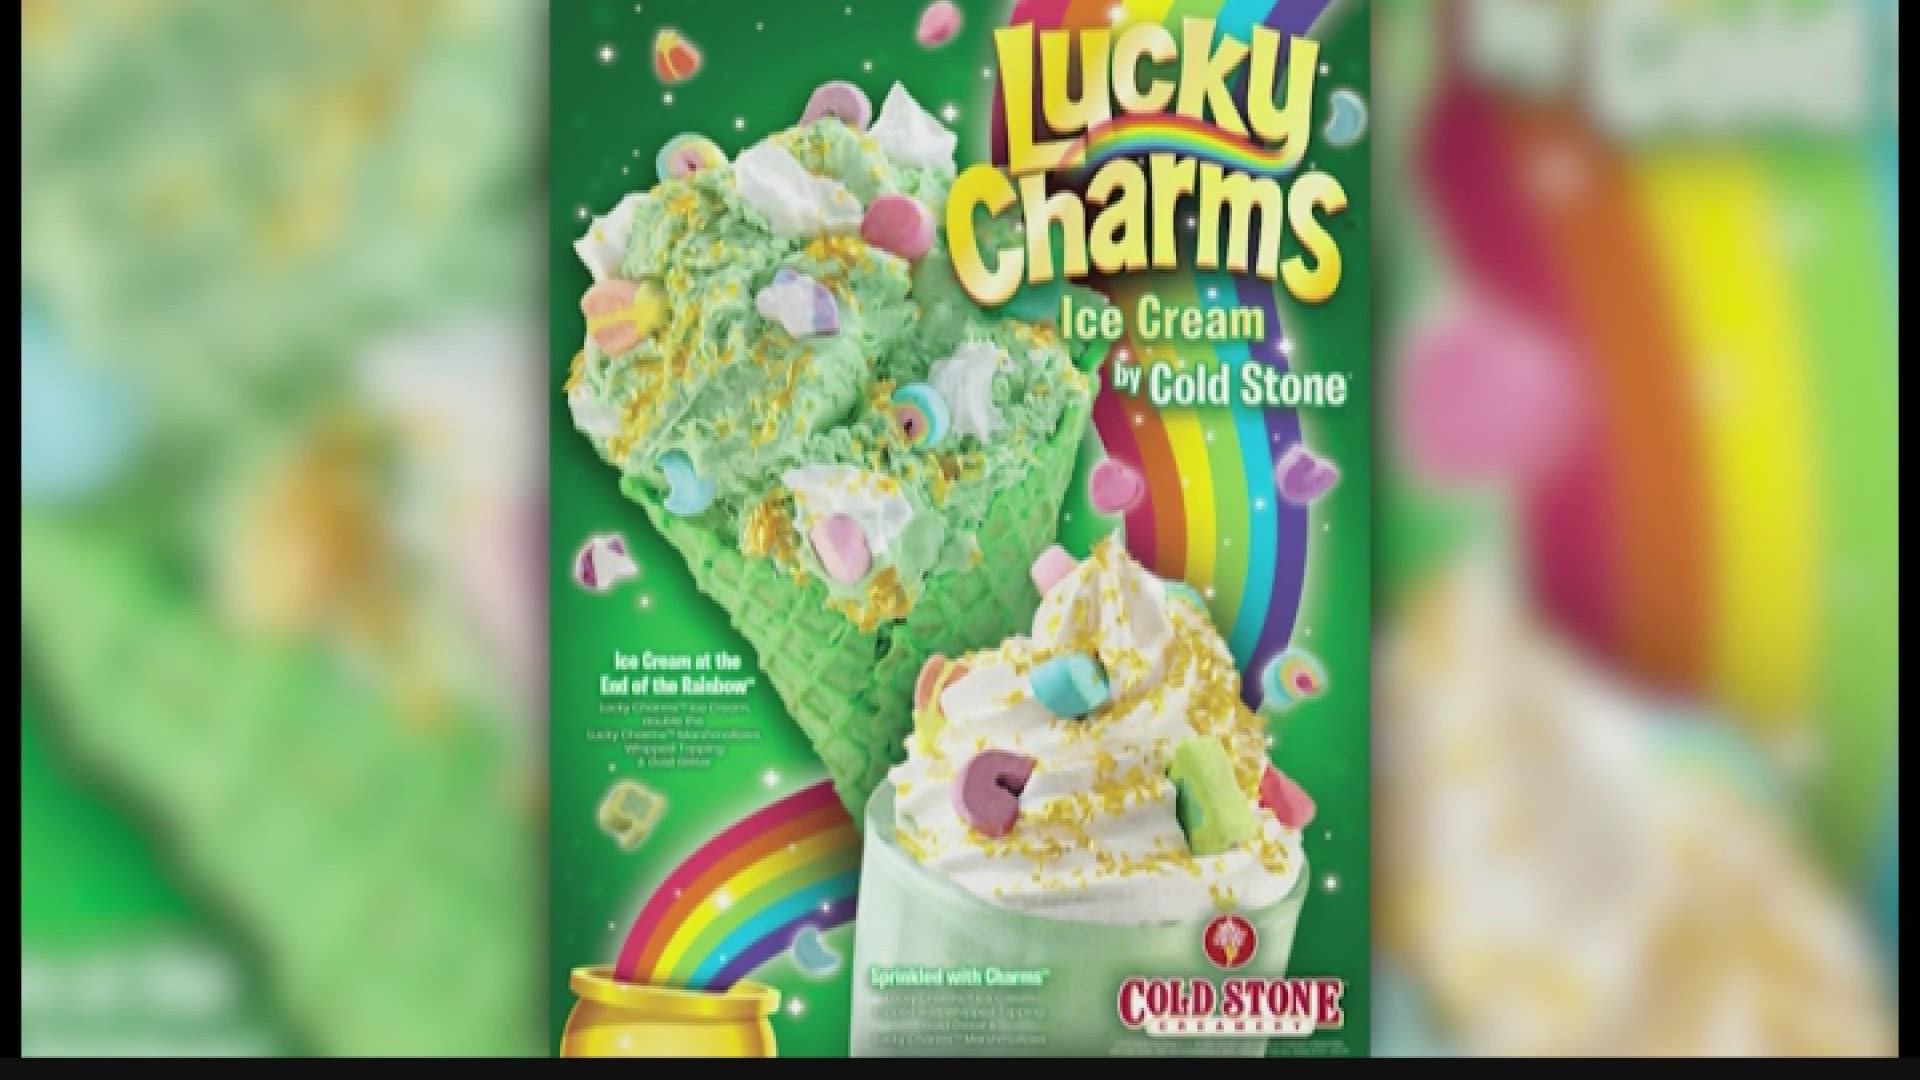 Added for St. Patrick's Day, the special flavor is available for a limited time only.